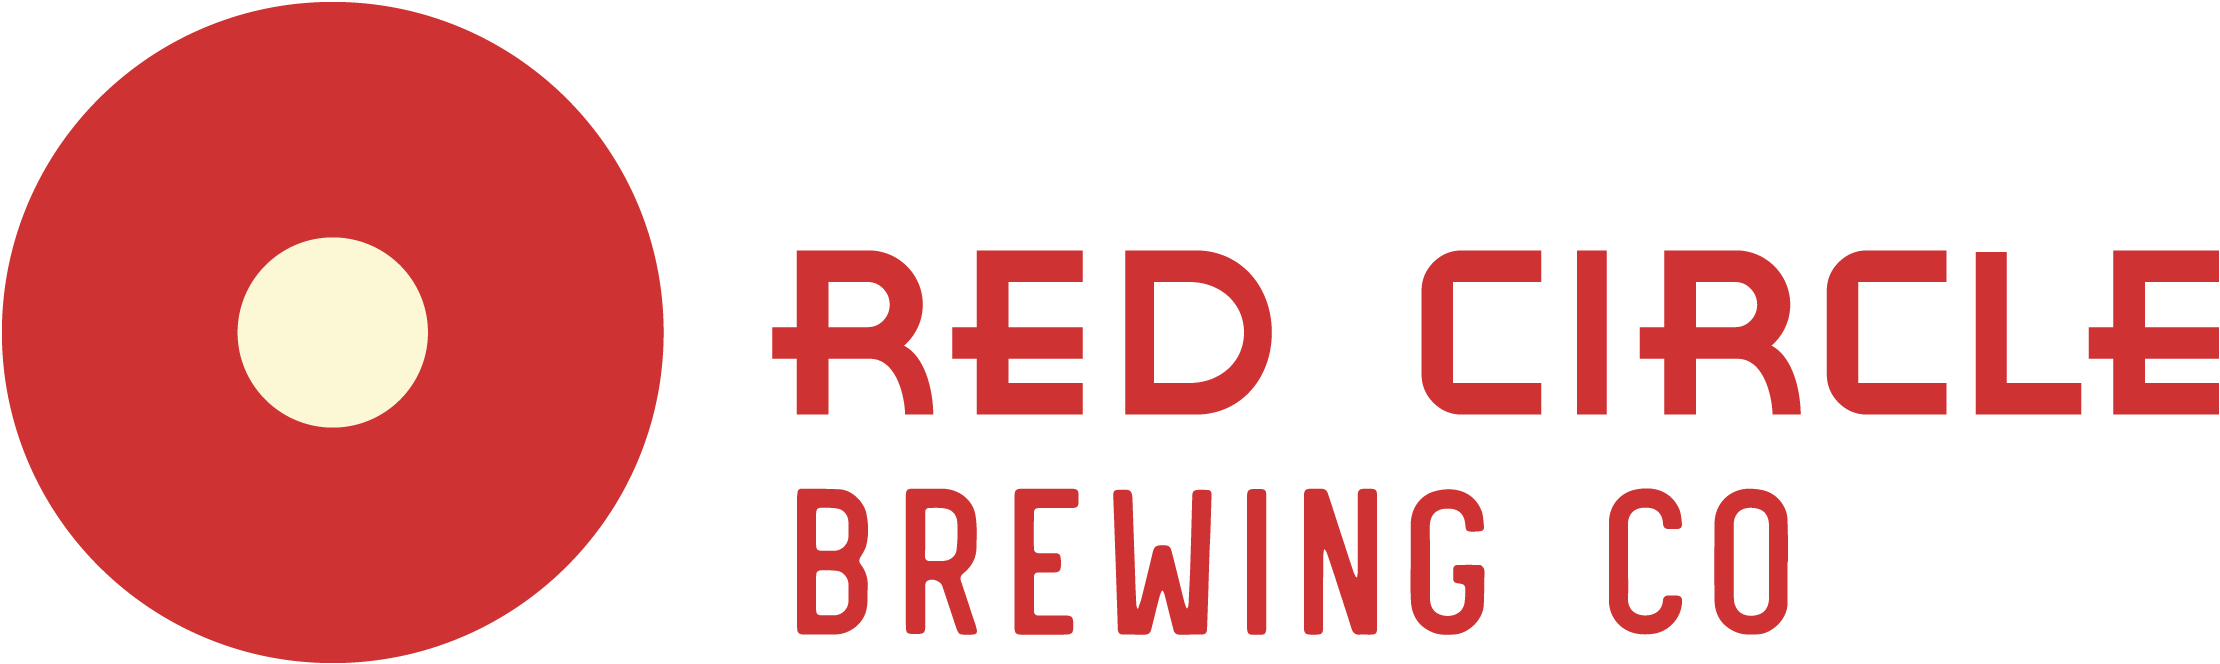 Red Circle Company Logo - Red Circle Brewing Co. | Home